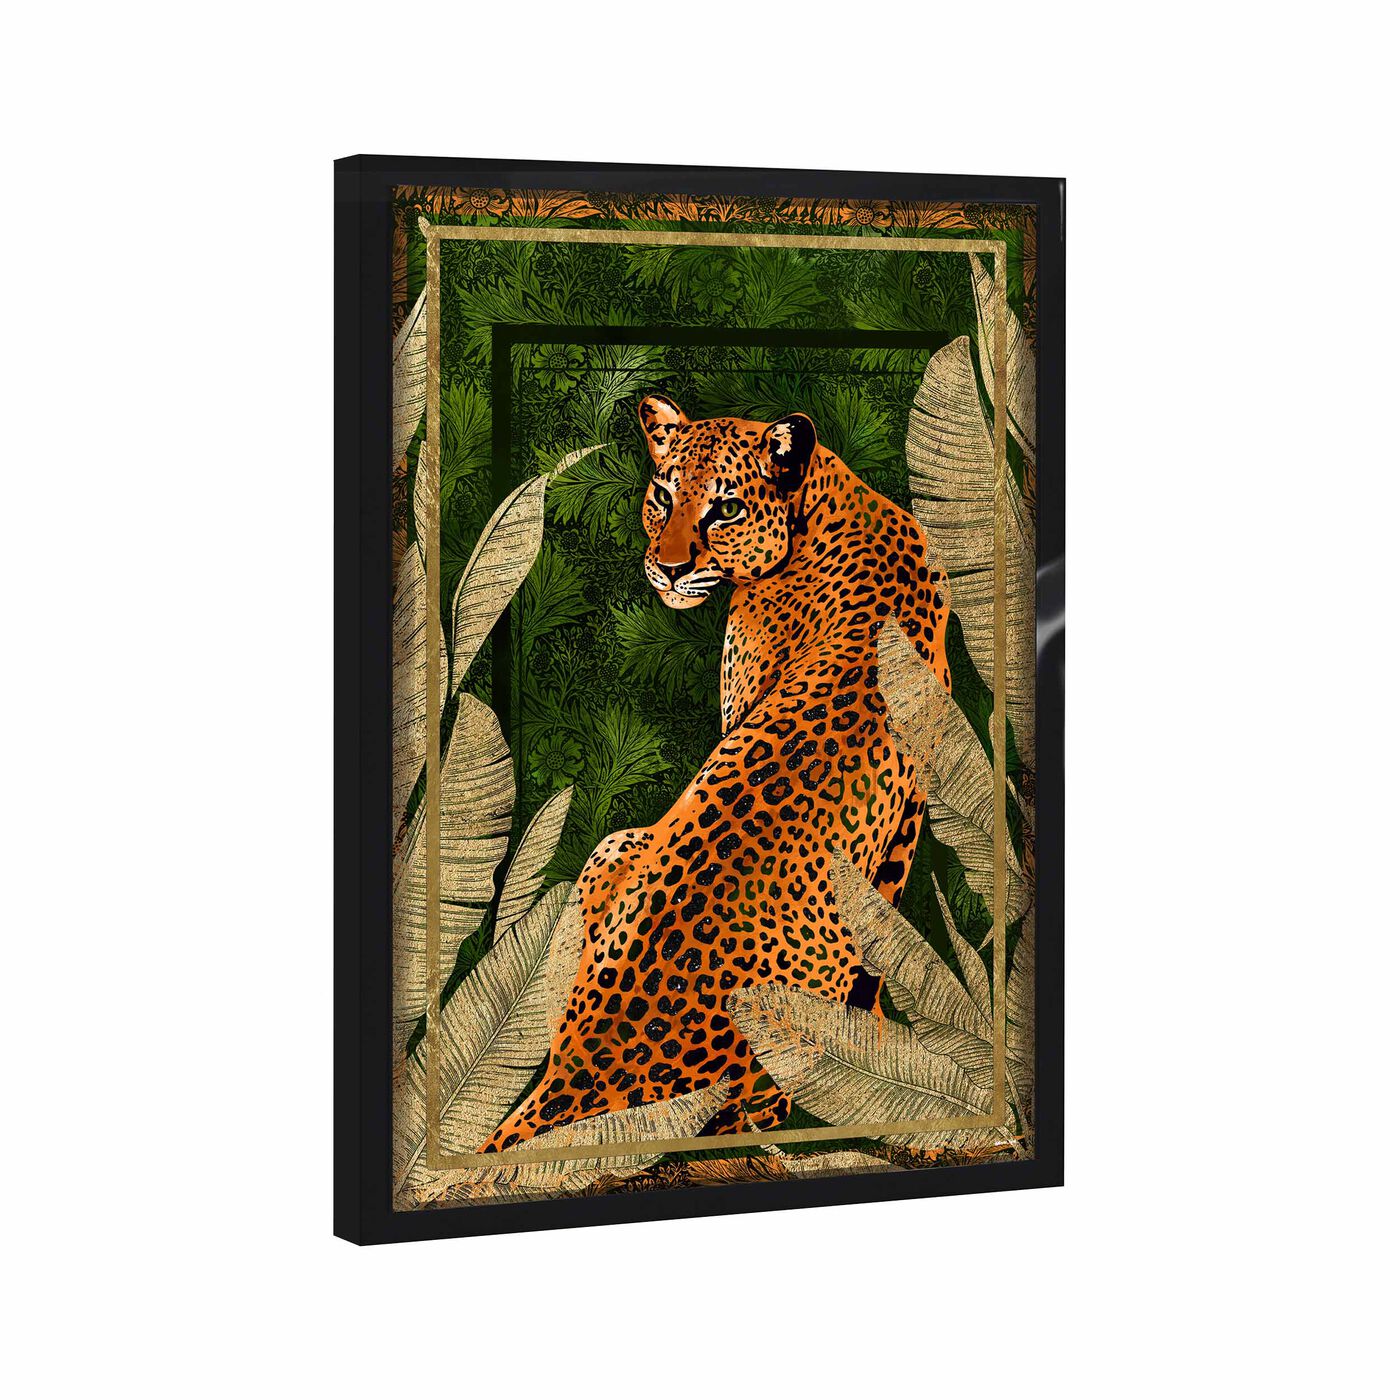 Emerald Jungle Cat - With Hand-Applied Gold Leaf and Glitter